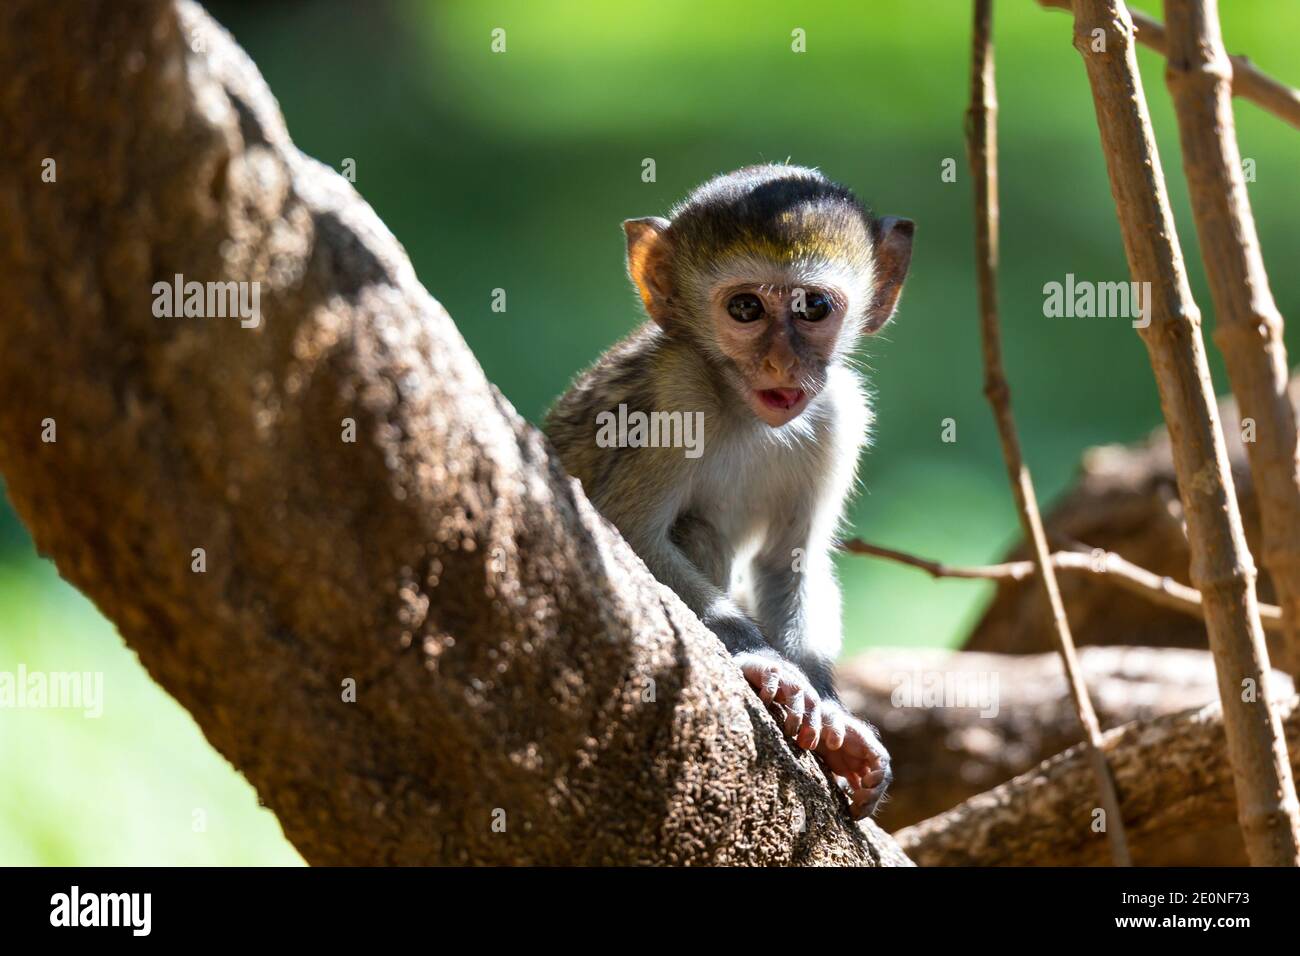 One little monkey sits and looks very curious. Stock Photo